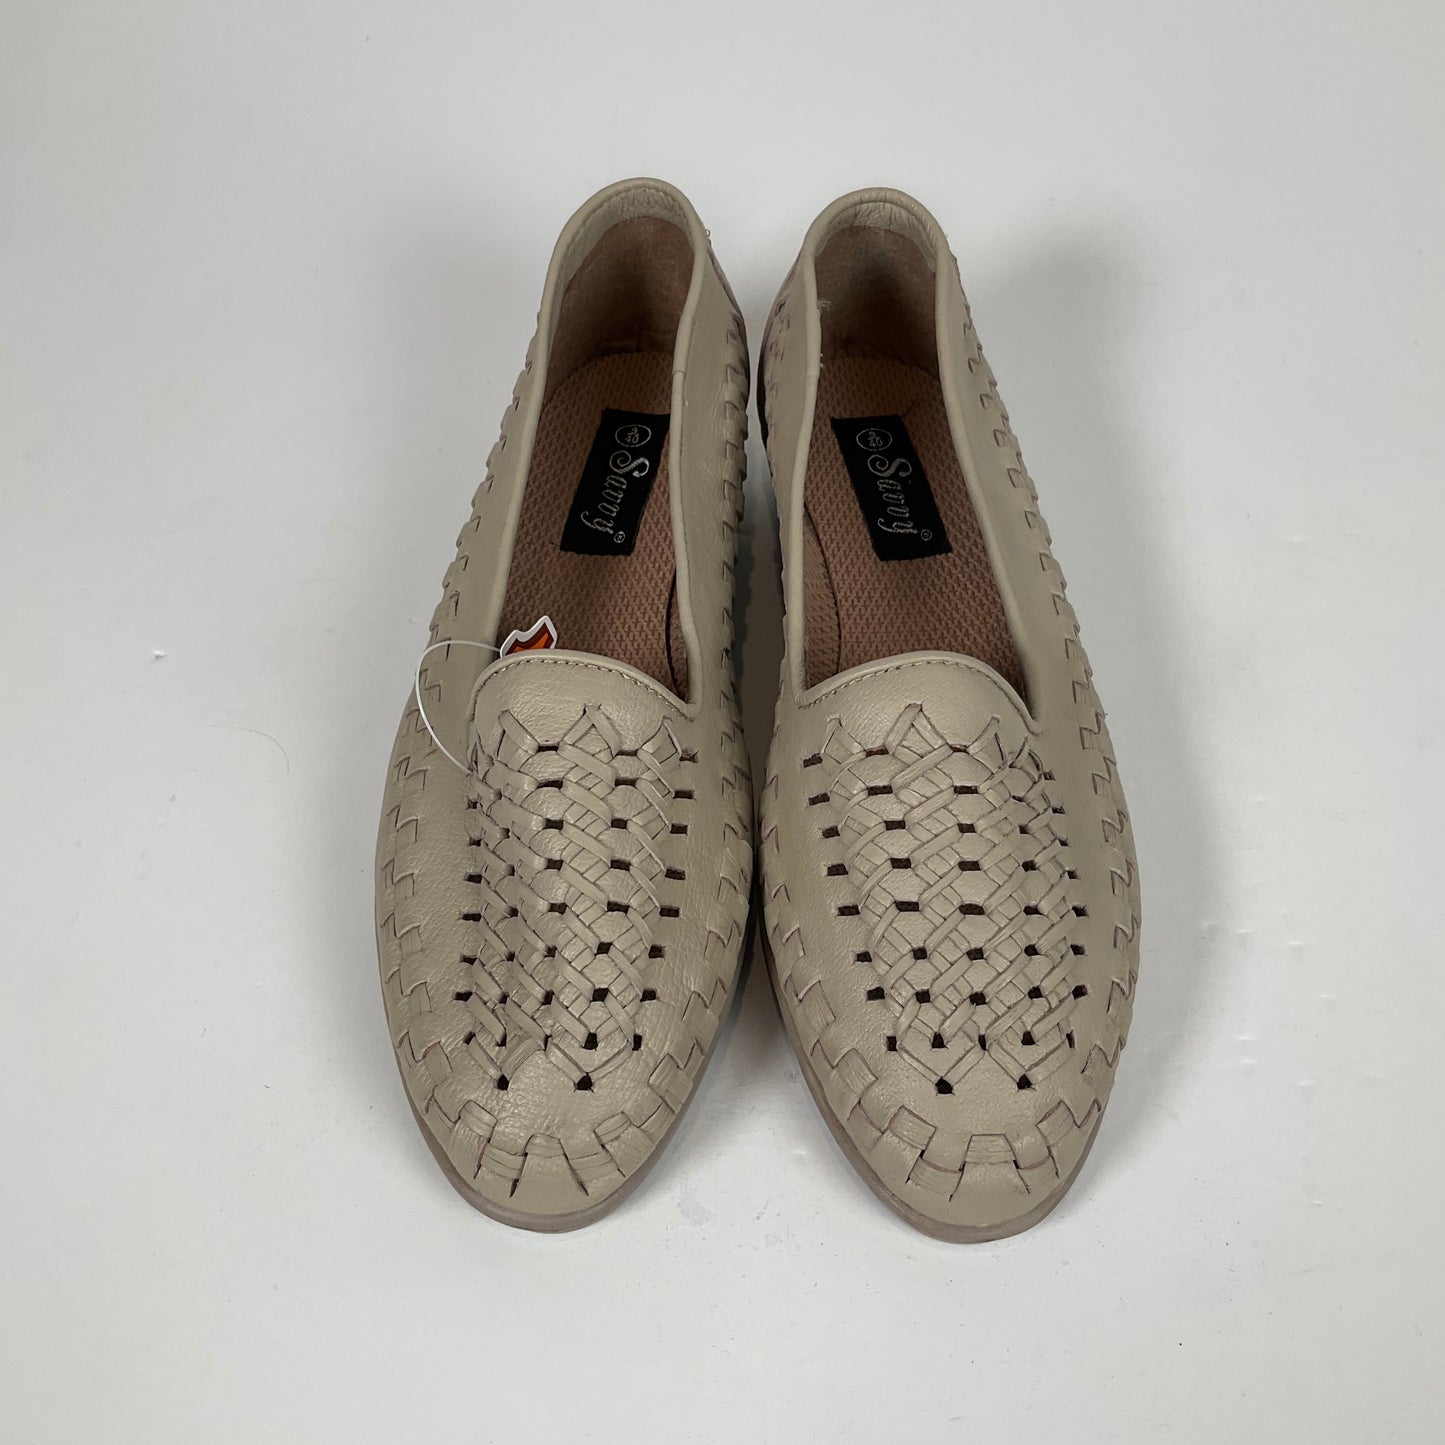 Savoy - Shoes - Size 9